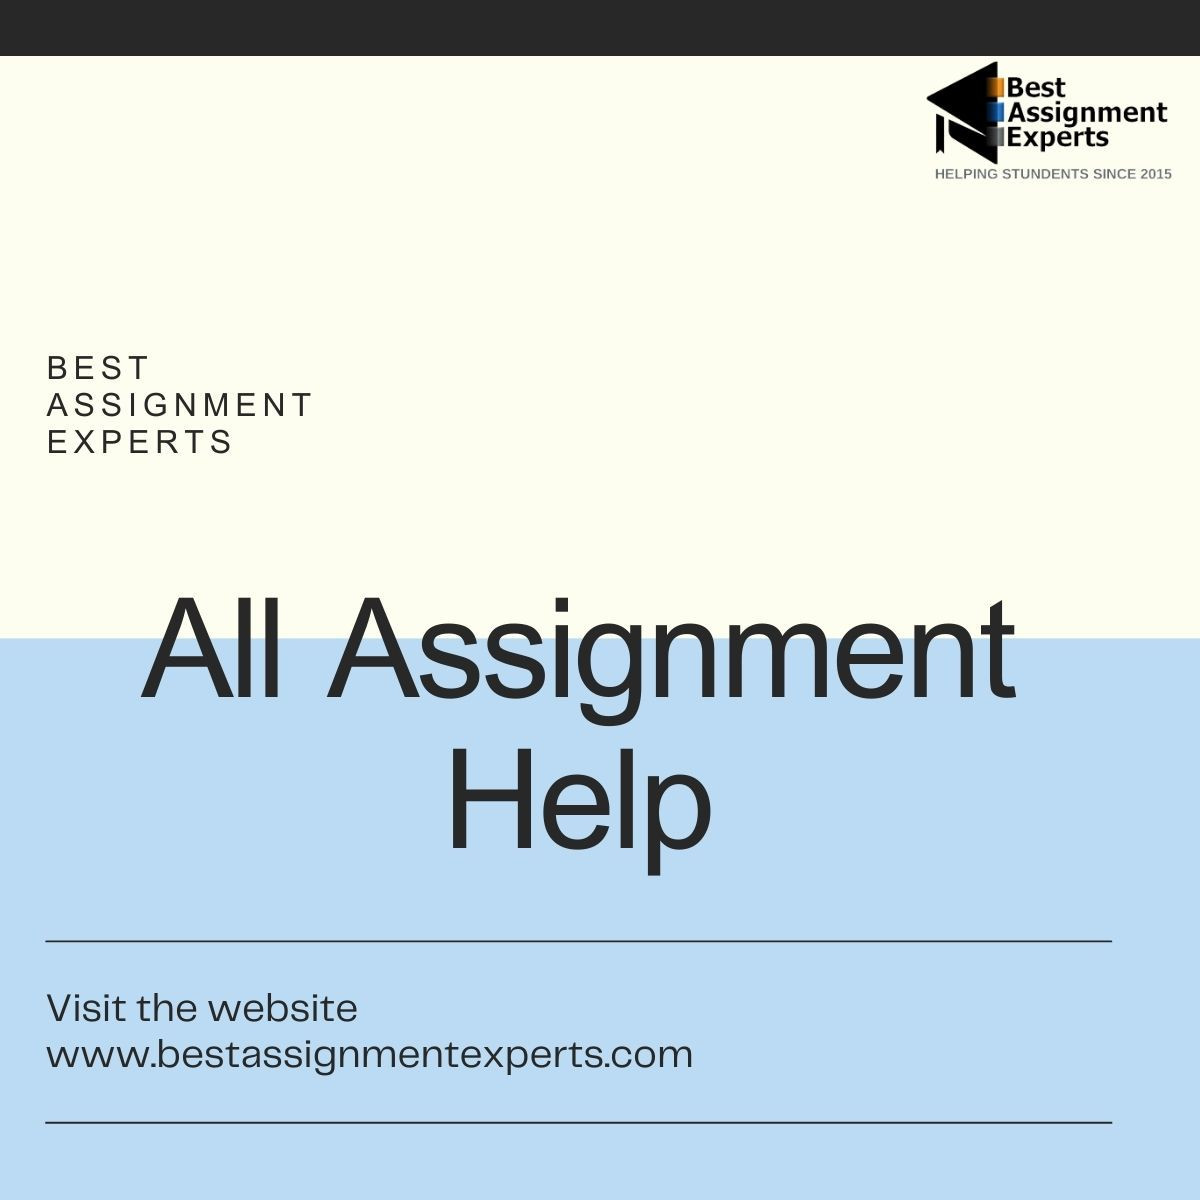 all-assignment-help-1_large